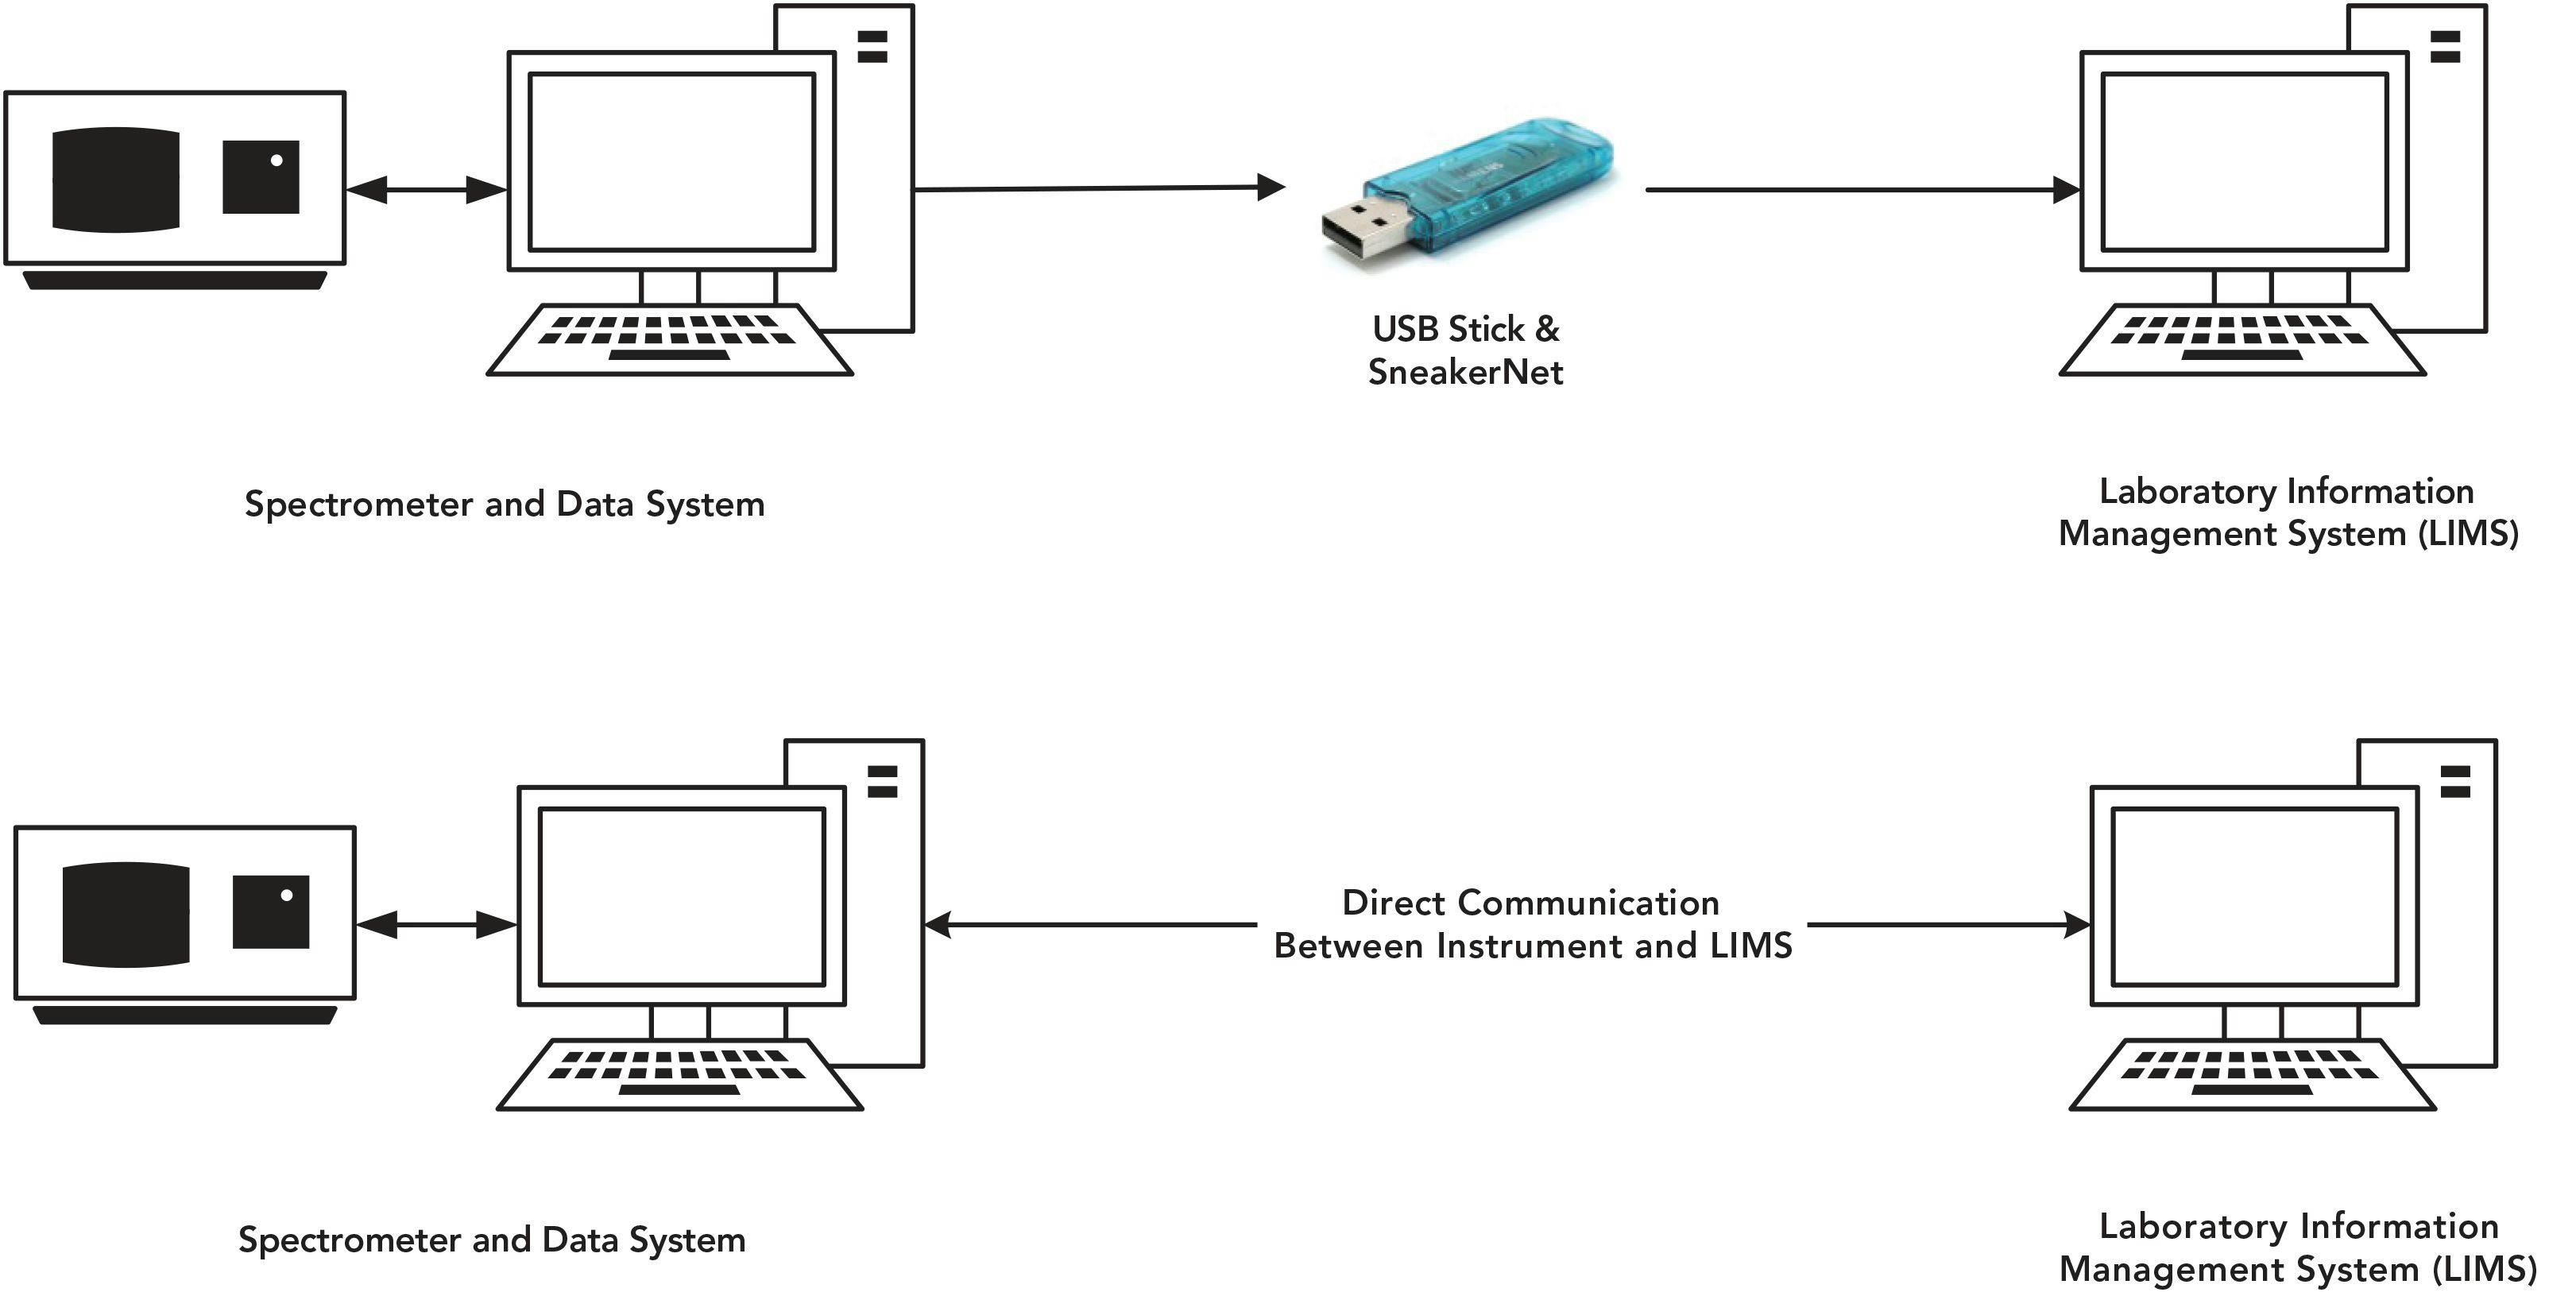 FIGURE 1: SneakerNet and interfaced transfer mechanisms between an instrument data system and a LIMS.